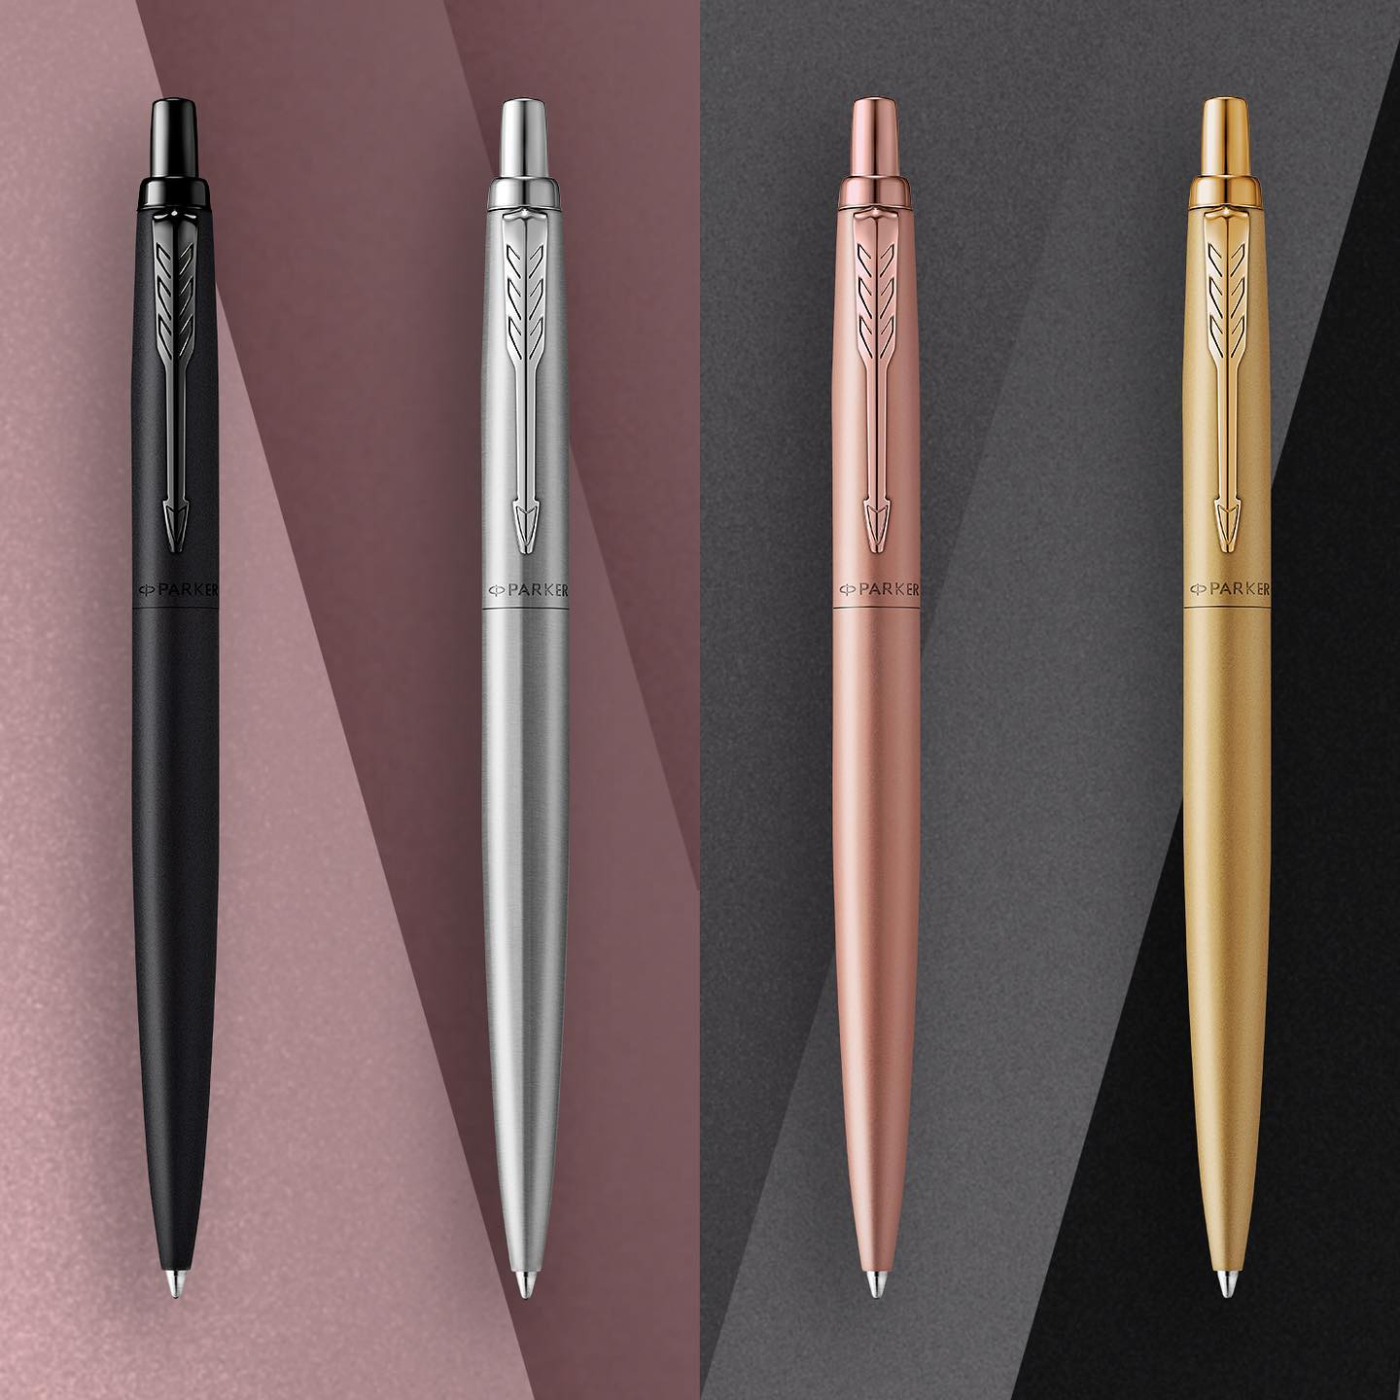 Jotter XL Monochrome Pink Gold Ballpoint in the group Pens / Fine Writing / Ballpoint Pens at Pen Store (112290)